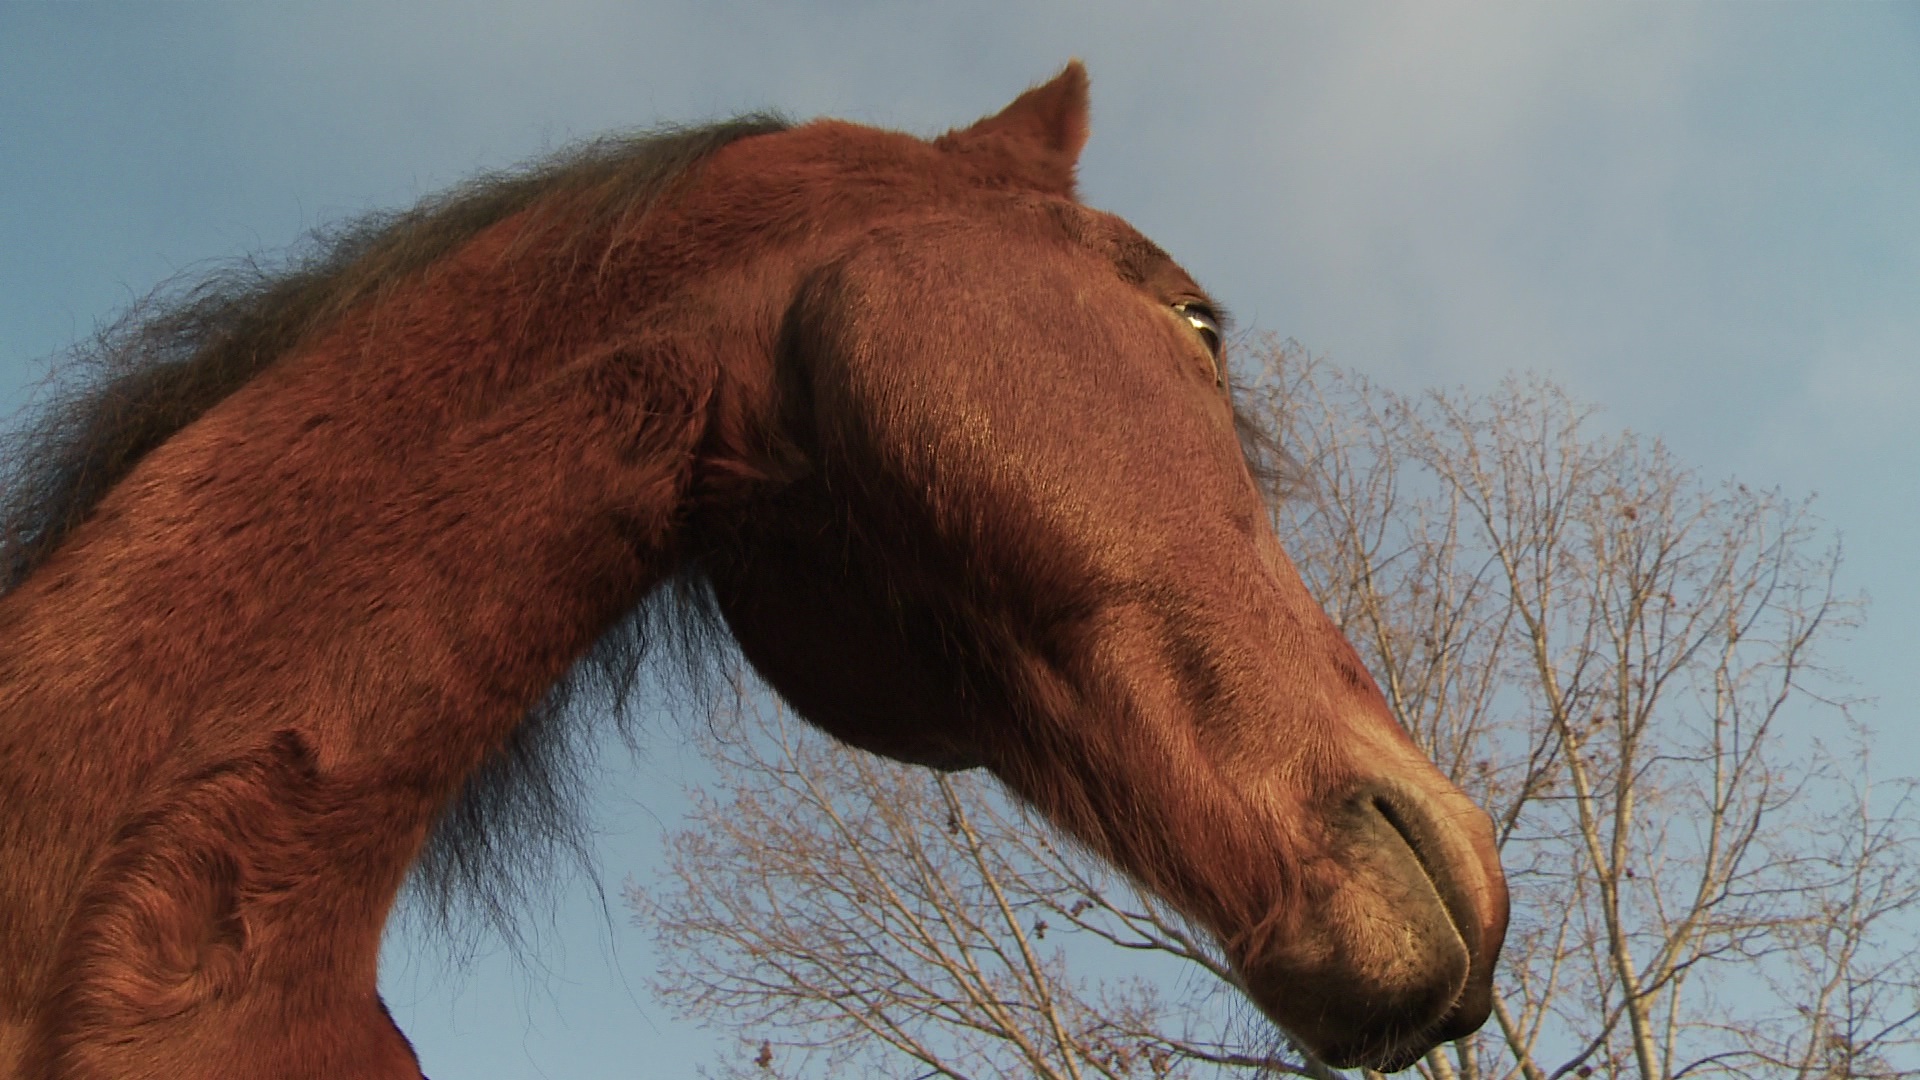 Ronny, Sandro Hürzeler's fabulous Swiss French Mountain Horse in the documentary THE FREEDOM OF THE HEART.